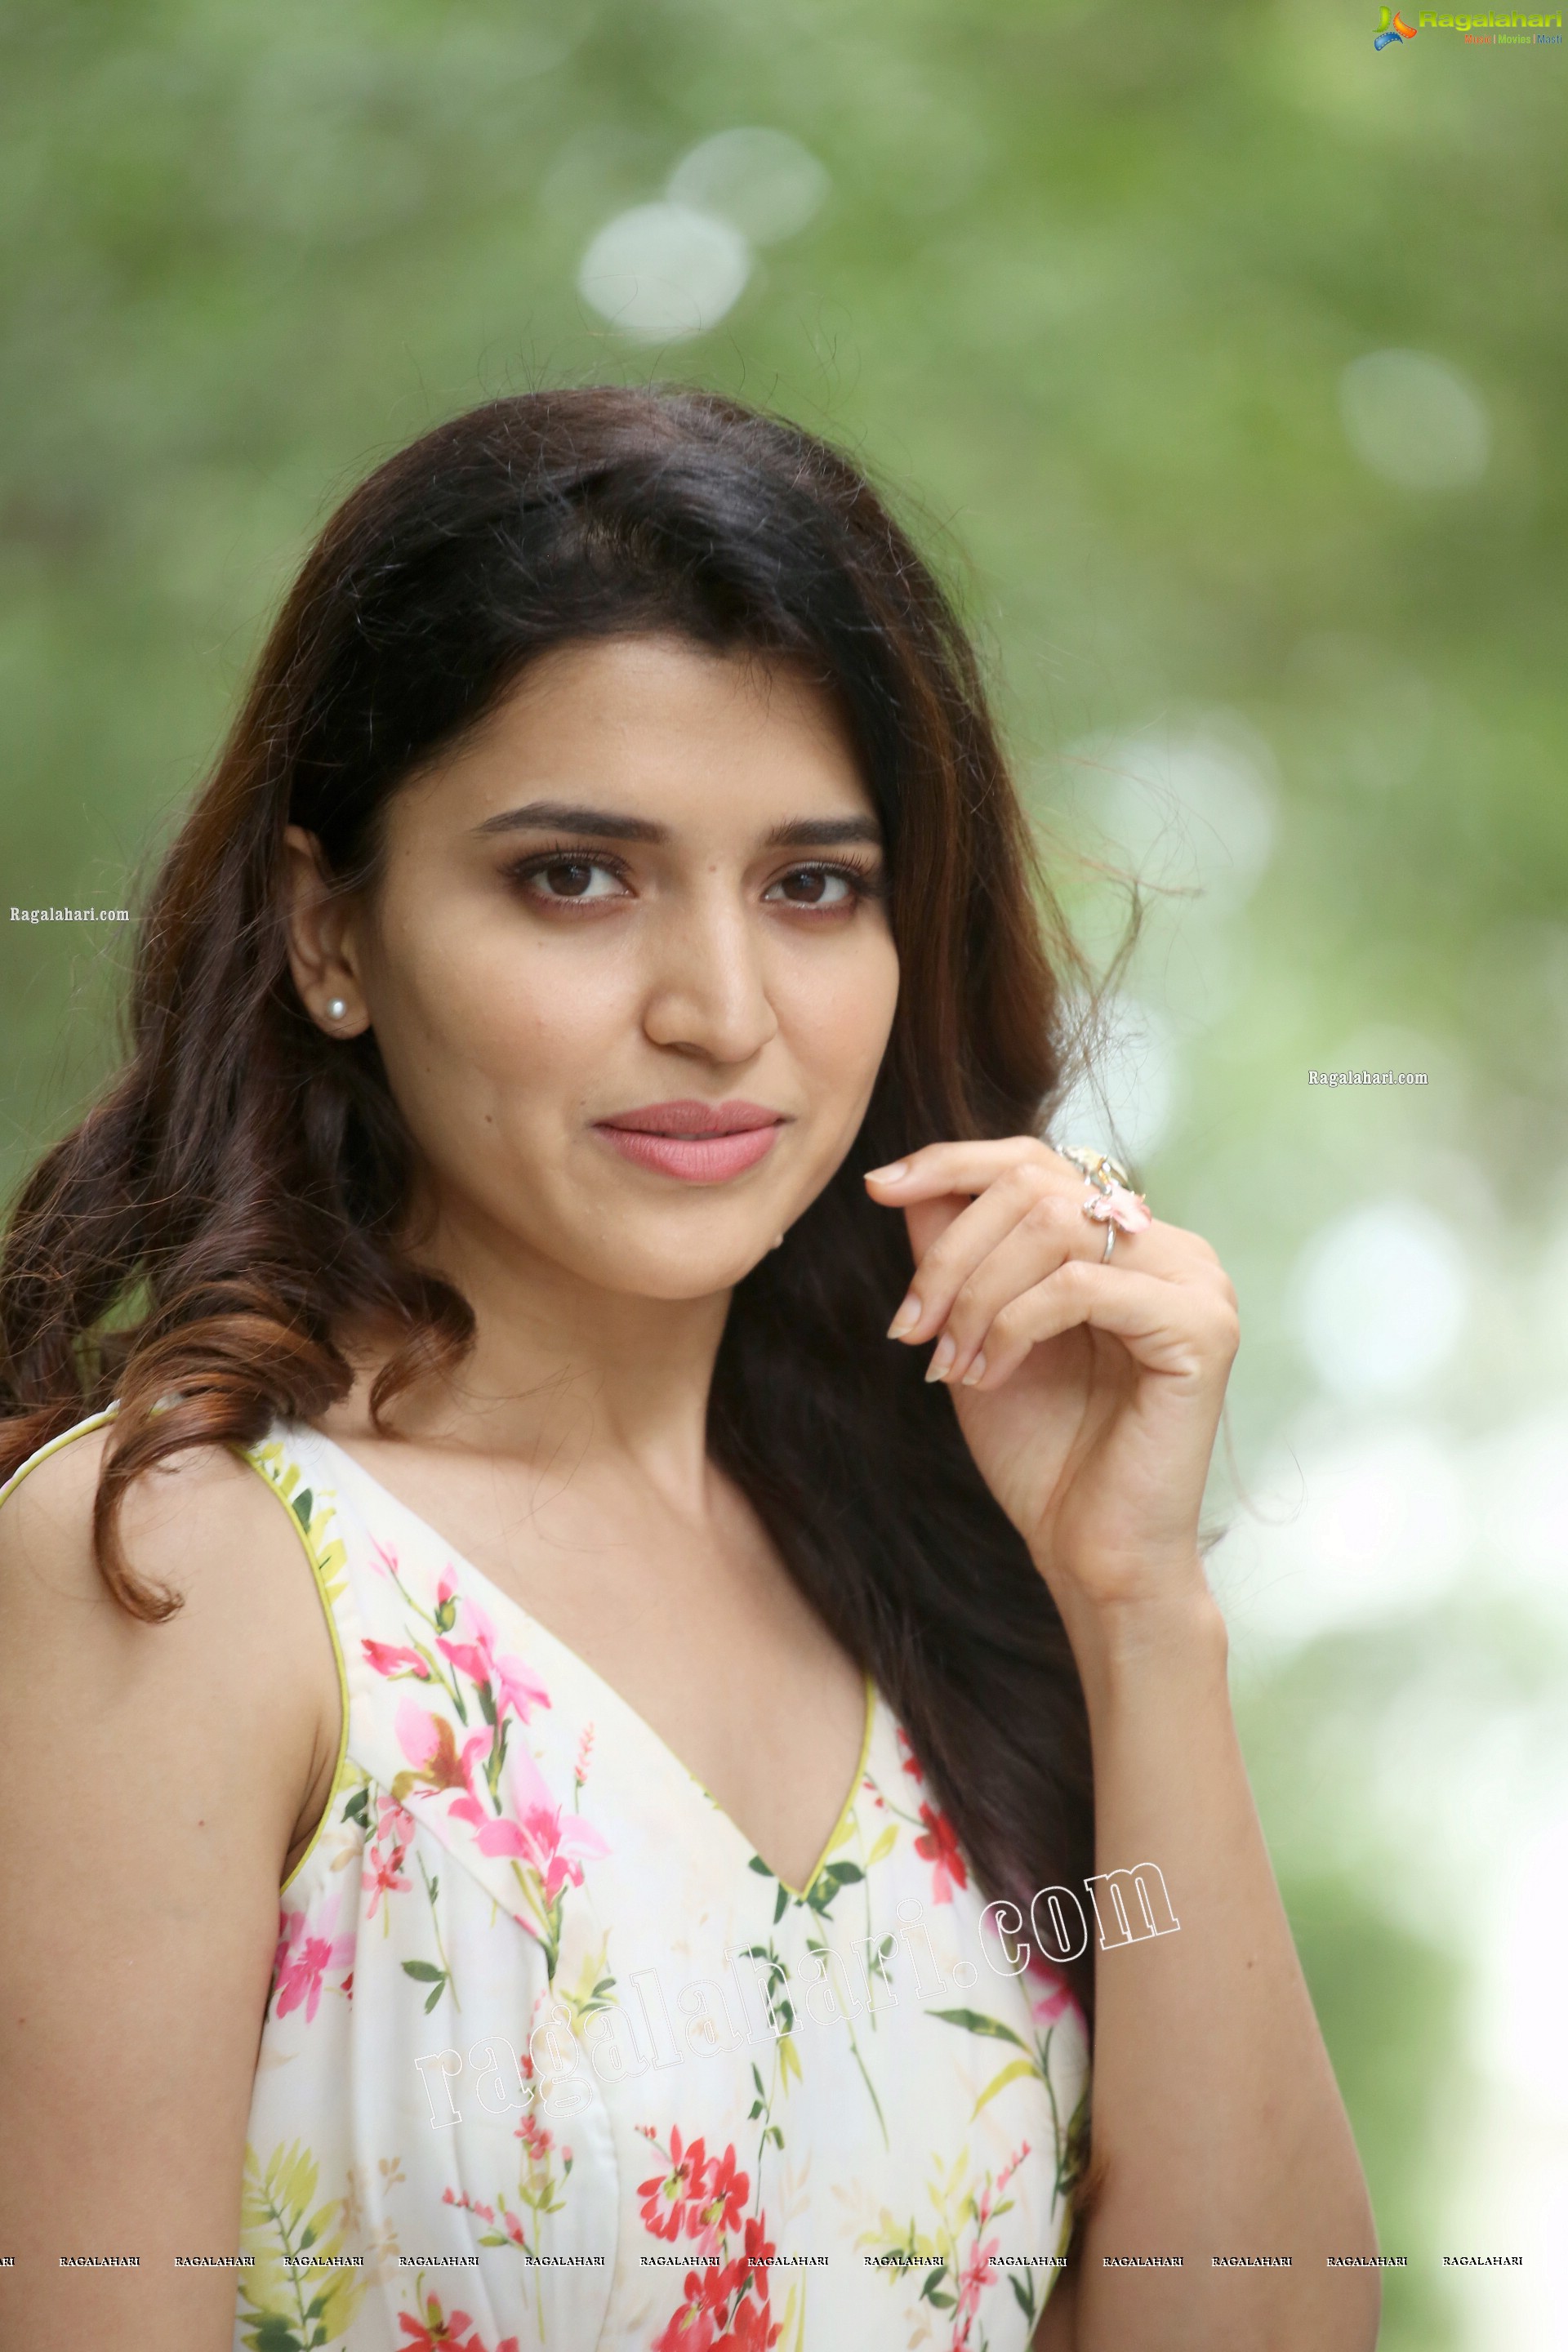 Chitra Shukla in White Floral Dress, Exclusive Photoshoot